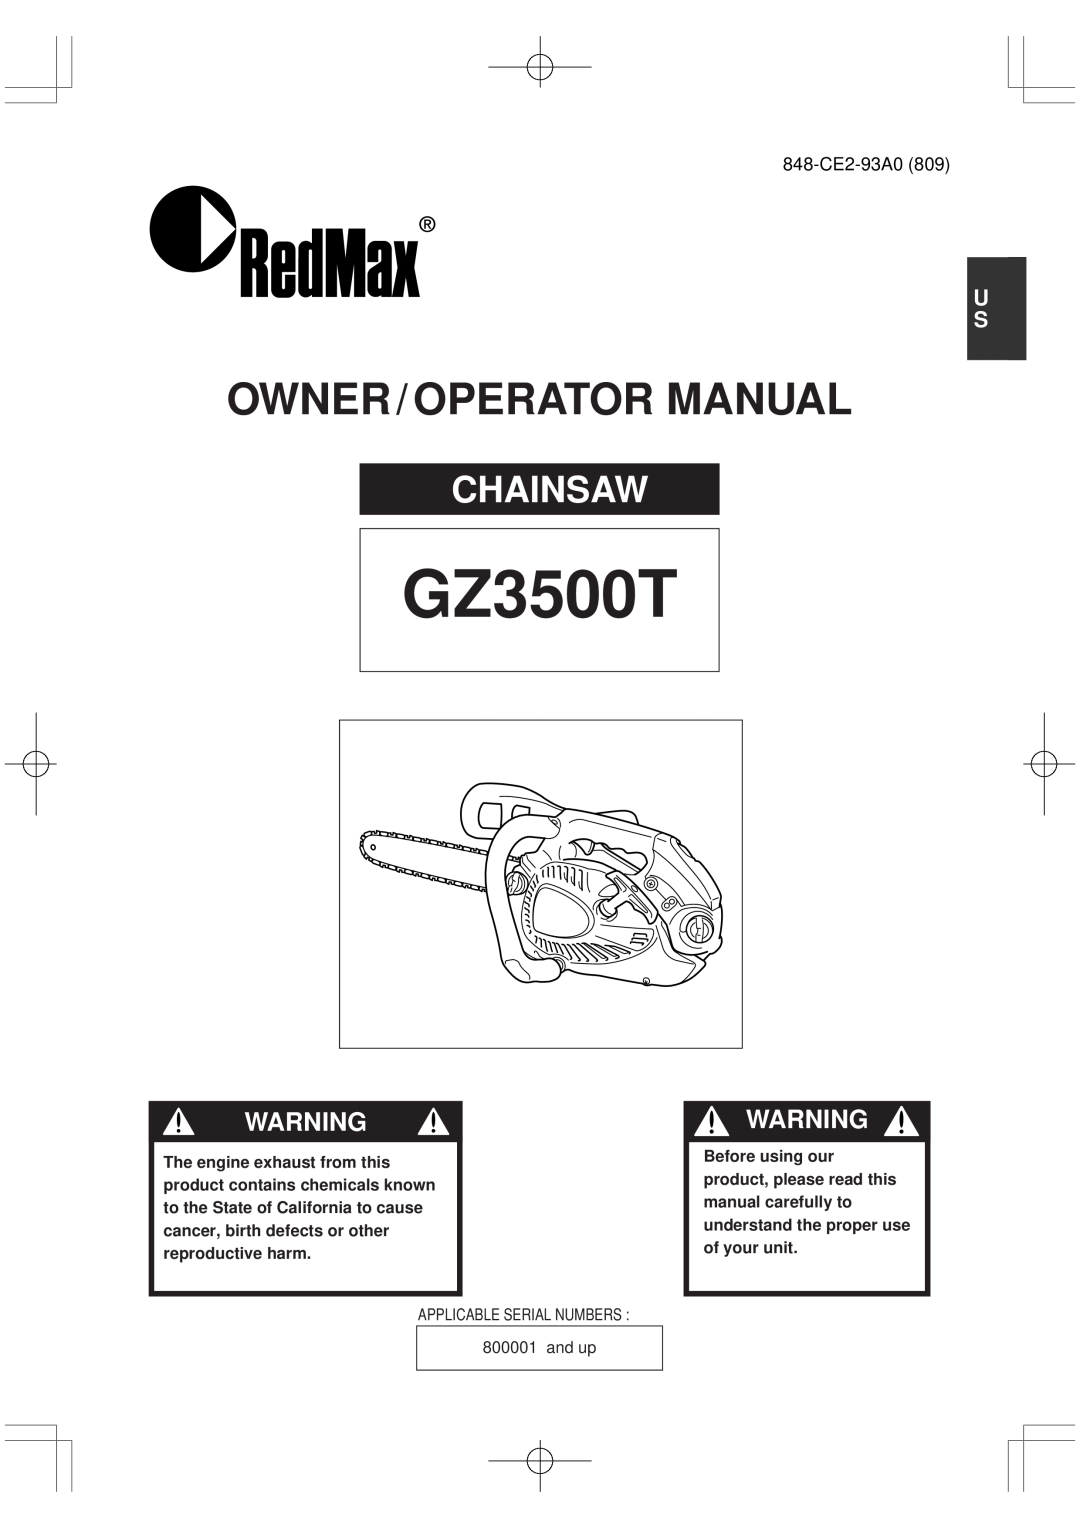 RedMax GZ3500T manual F R E S, Owner / Operator Manual, Chainsaw, 848-CE2-93A0 